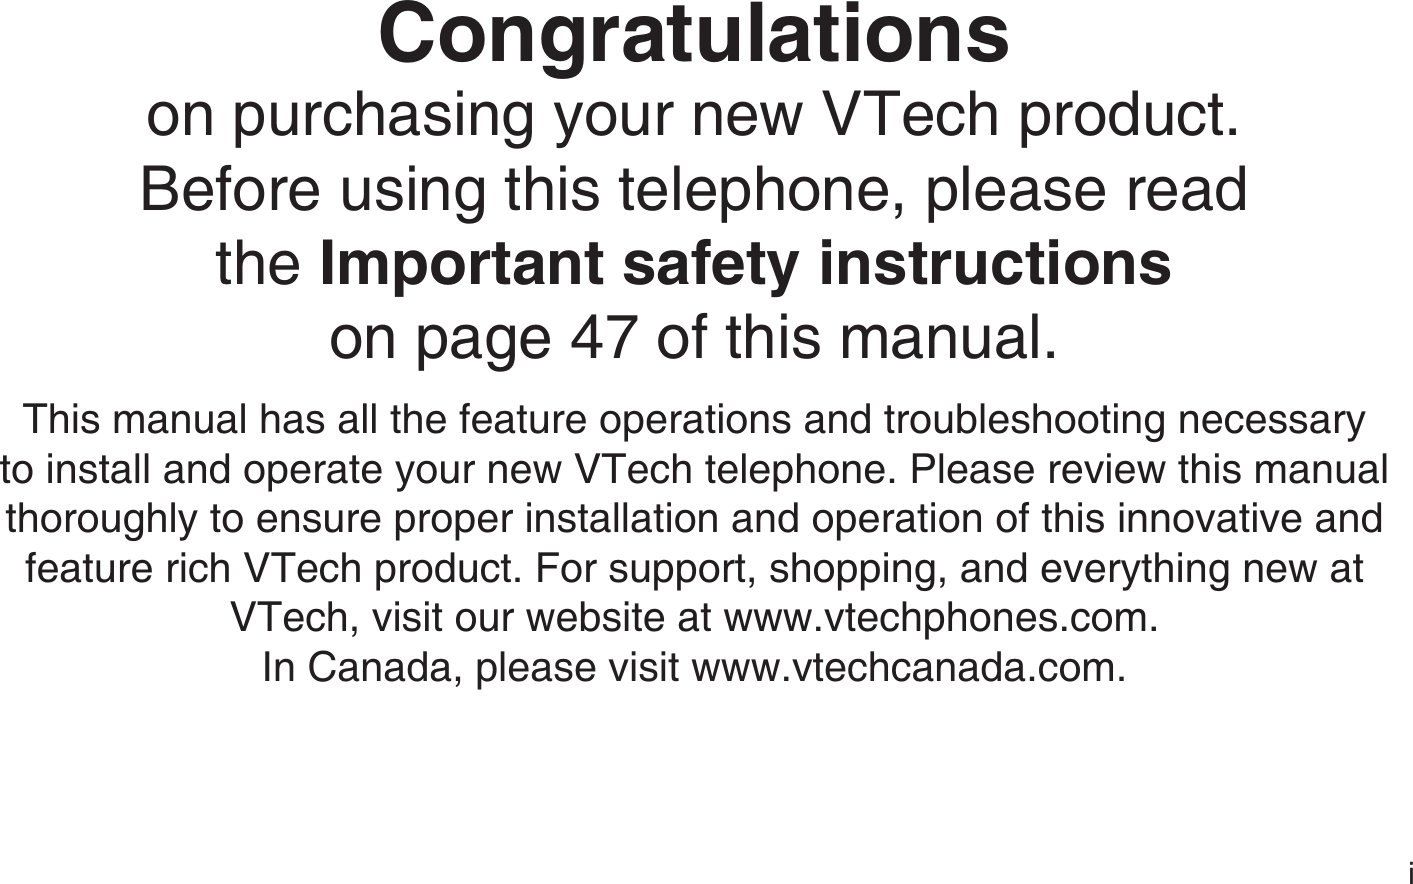 iCongratulationson purchasing your new VTech product.Before using this telephone, please read the Important safety instructionson page 47 of this manual.This manual has all the feature operations and troubleshooting necessary to install and operate your new VTech telephone. Please review this manual thoroughly to ensure proper installation and operation of this innovative and feature rich VTech product. For support, shopping, and everything new at VTech, visit our website at www.vtechphones.com.In Canada, please visit www.vtechcanada.com.